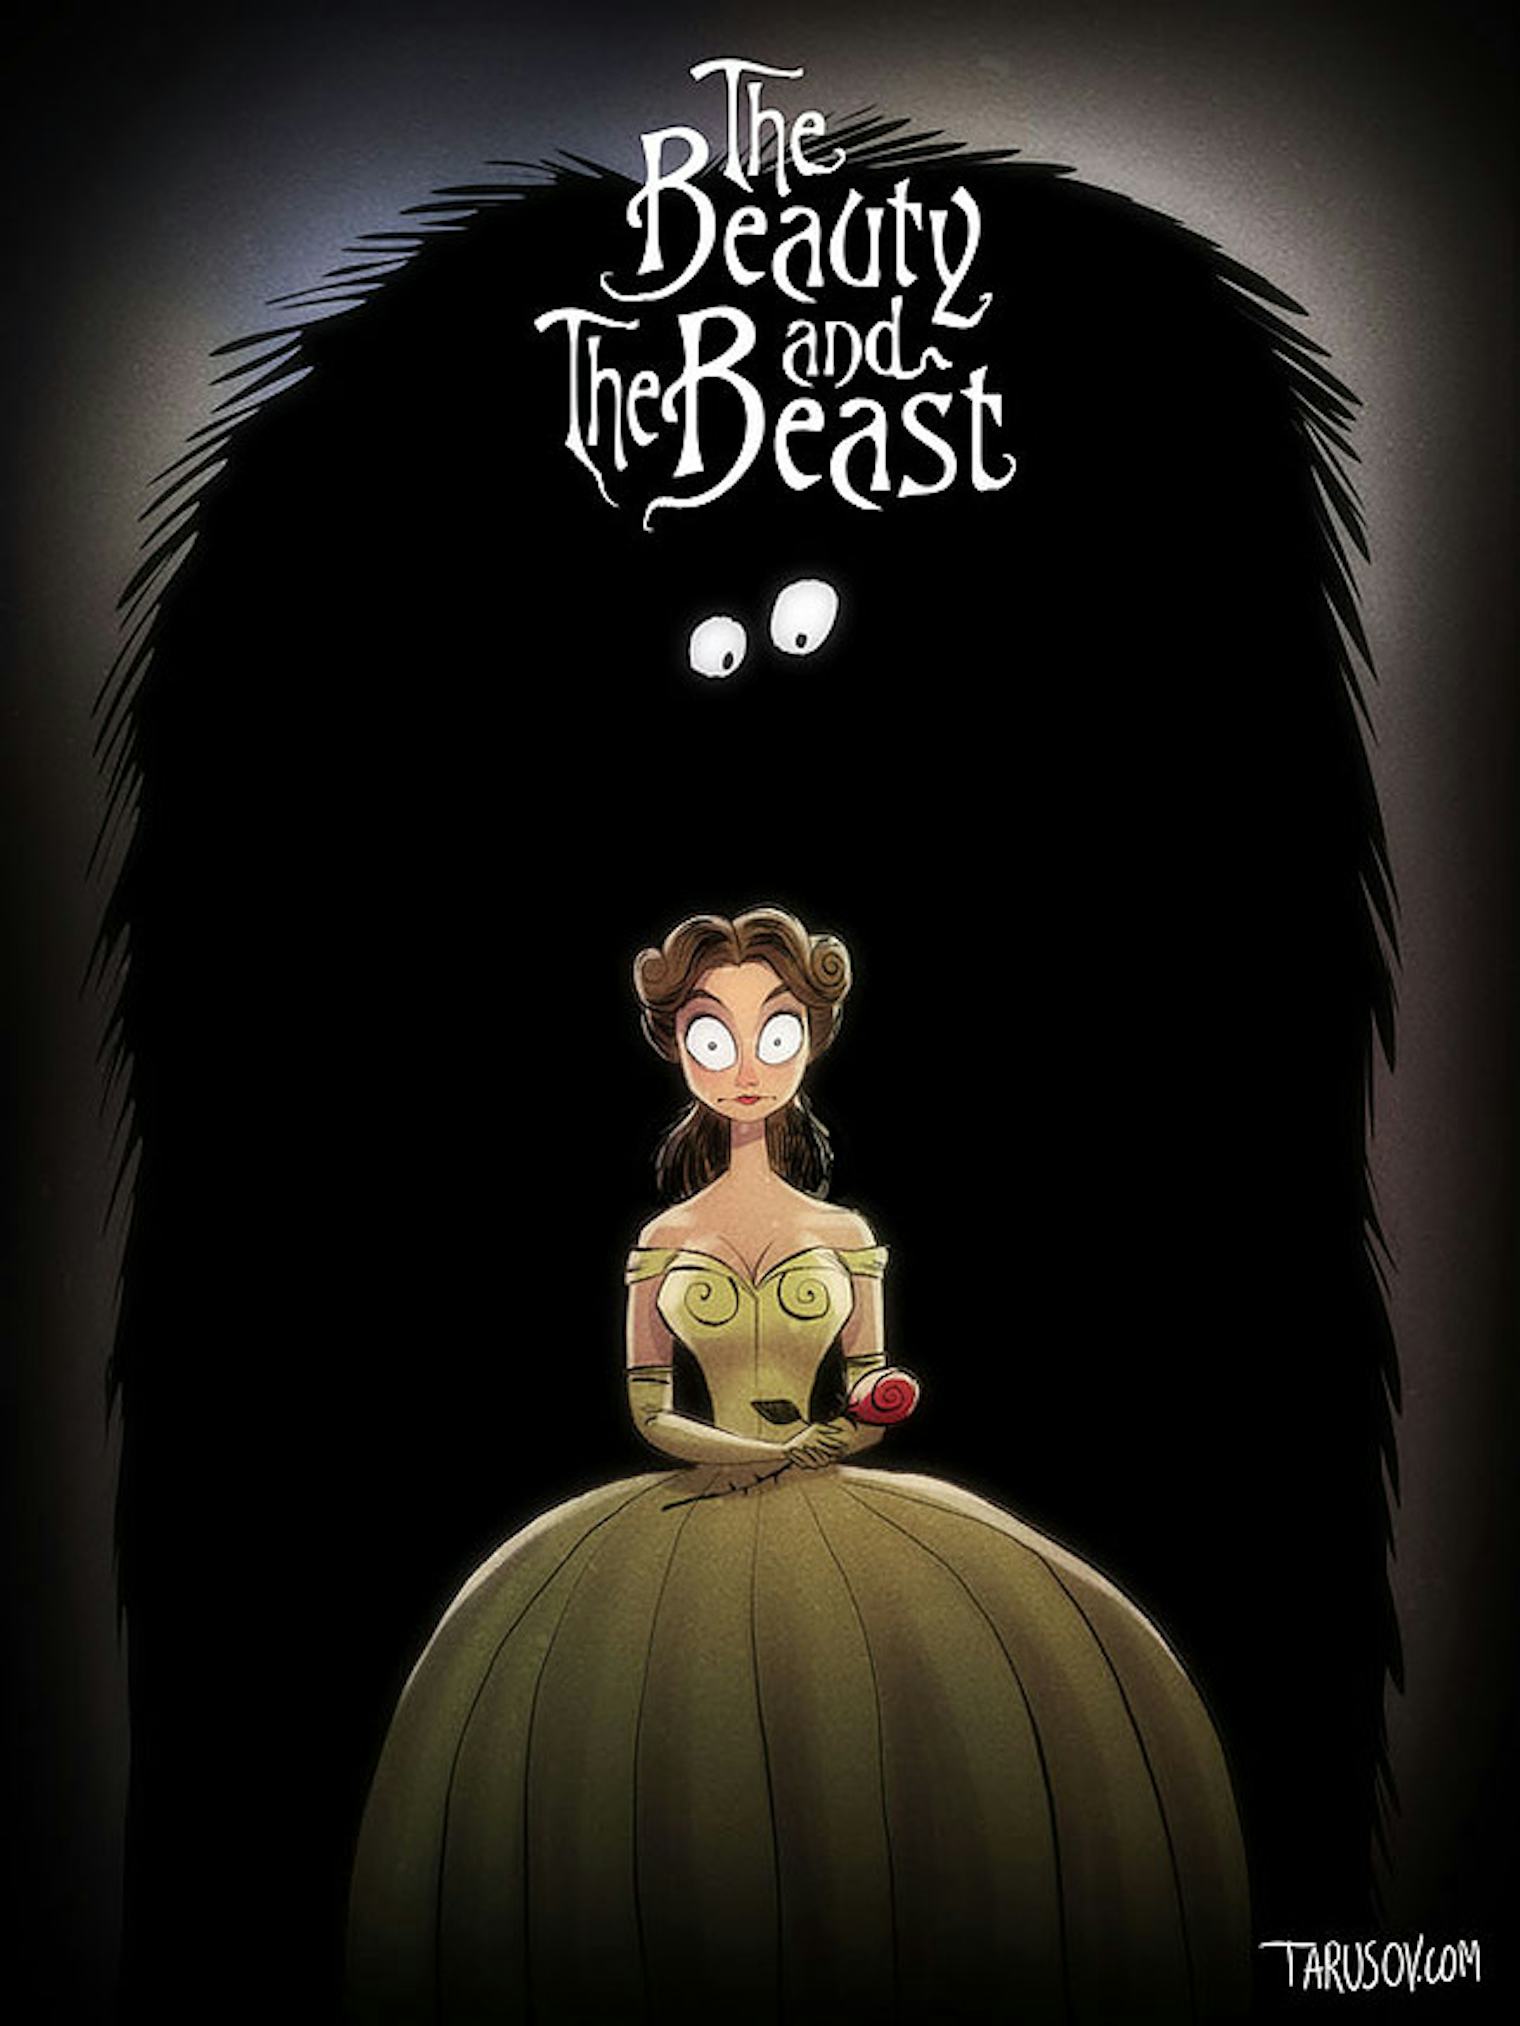 Disney Characters In Tim Burton Style Art Are The Perfect Mix Of Adorable And Grim